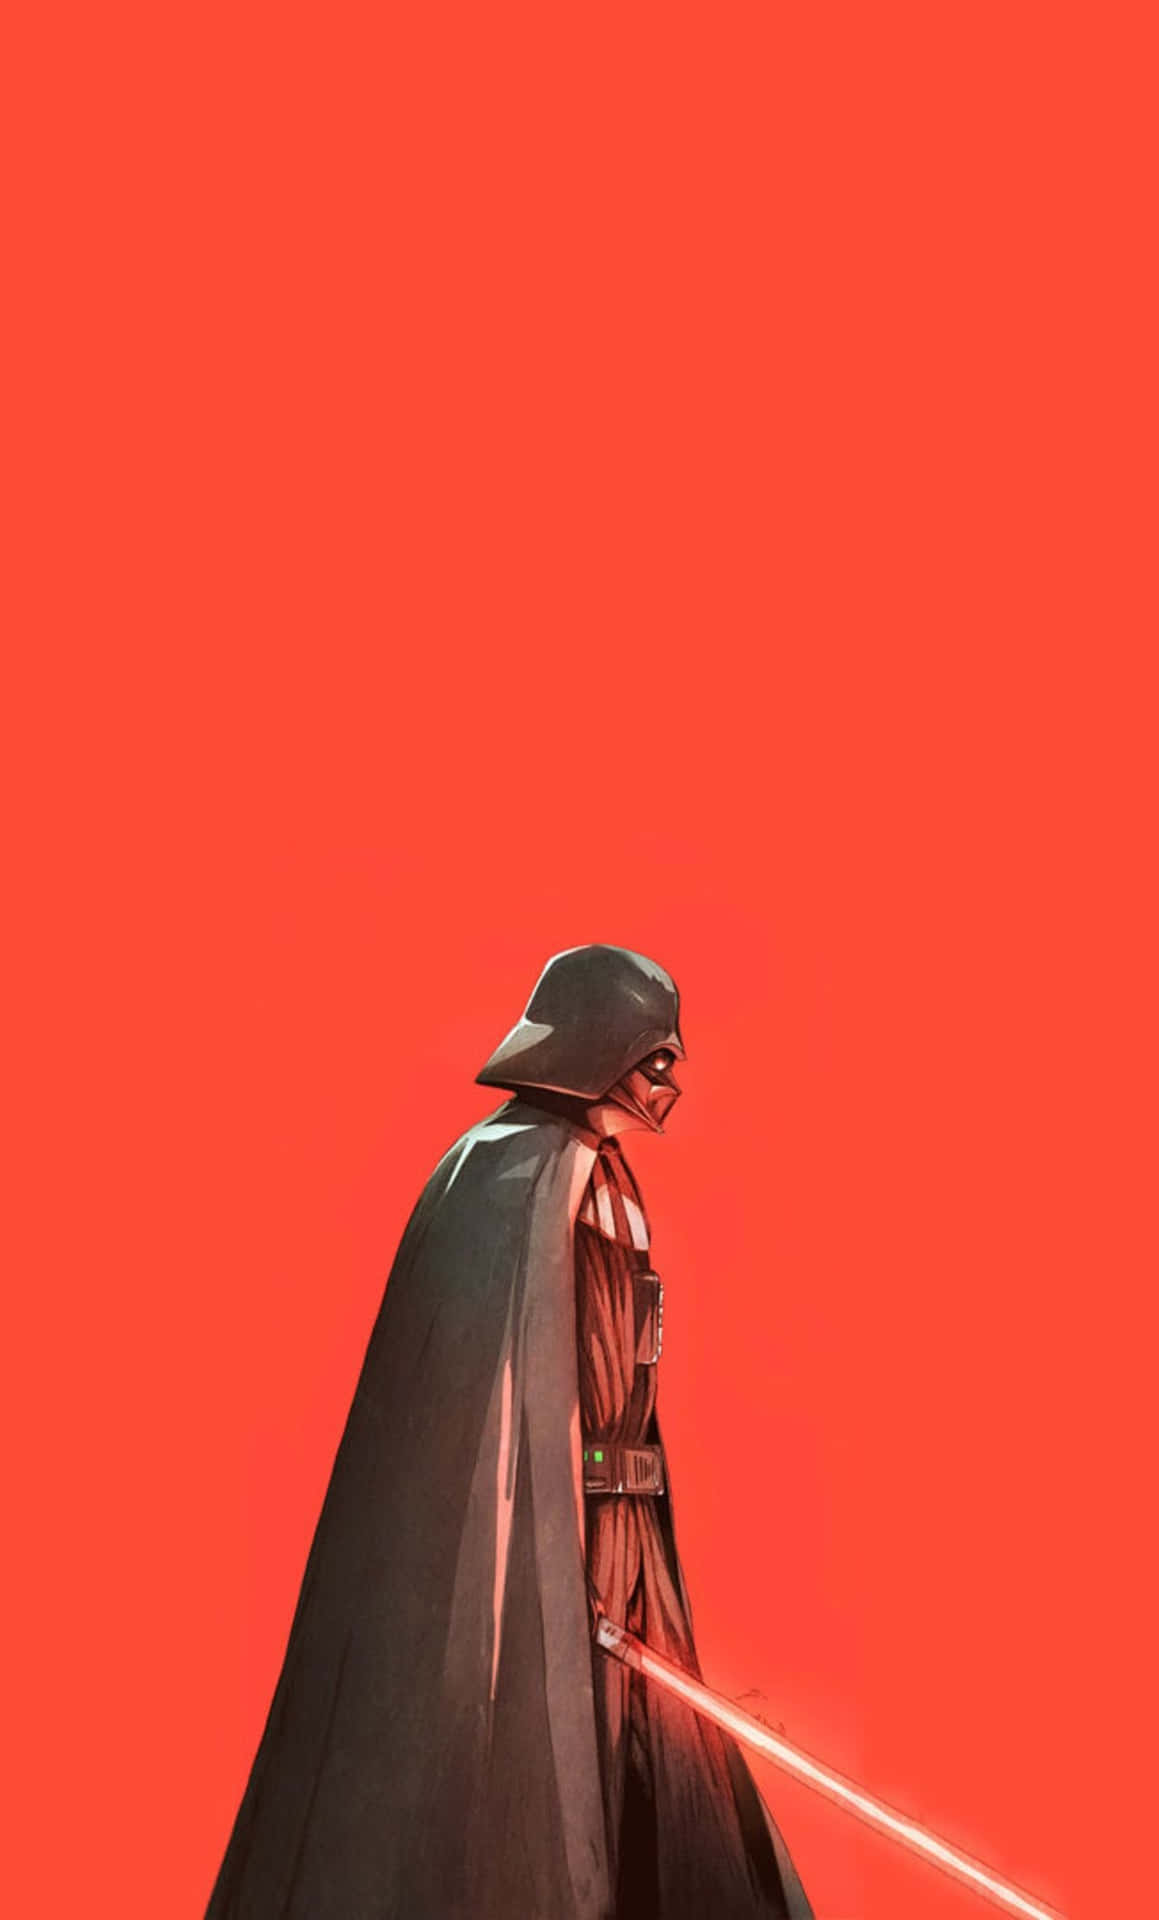 Get a Dark Side Look with the new Darth Vader iPhone Wallpaper